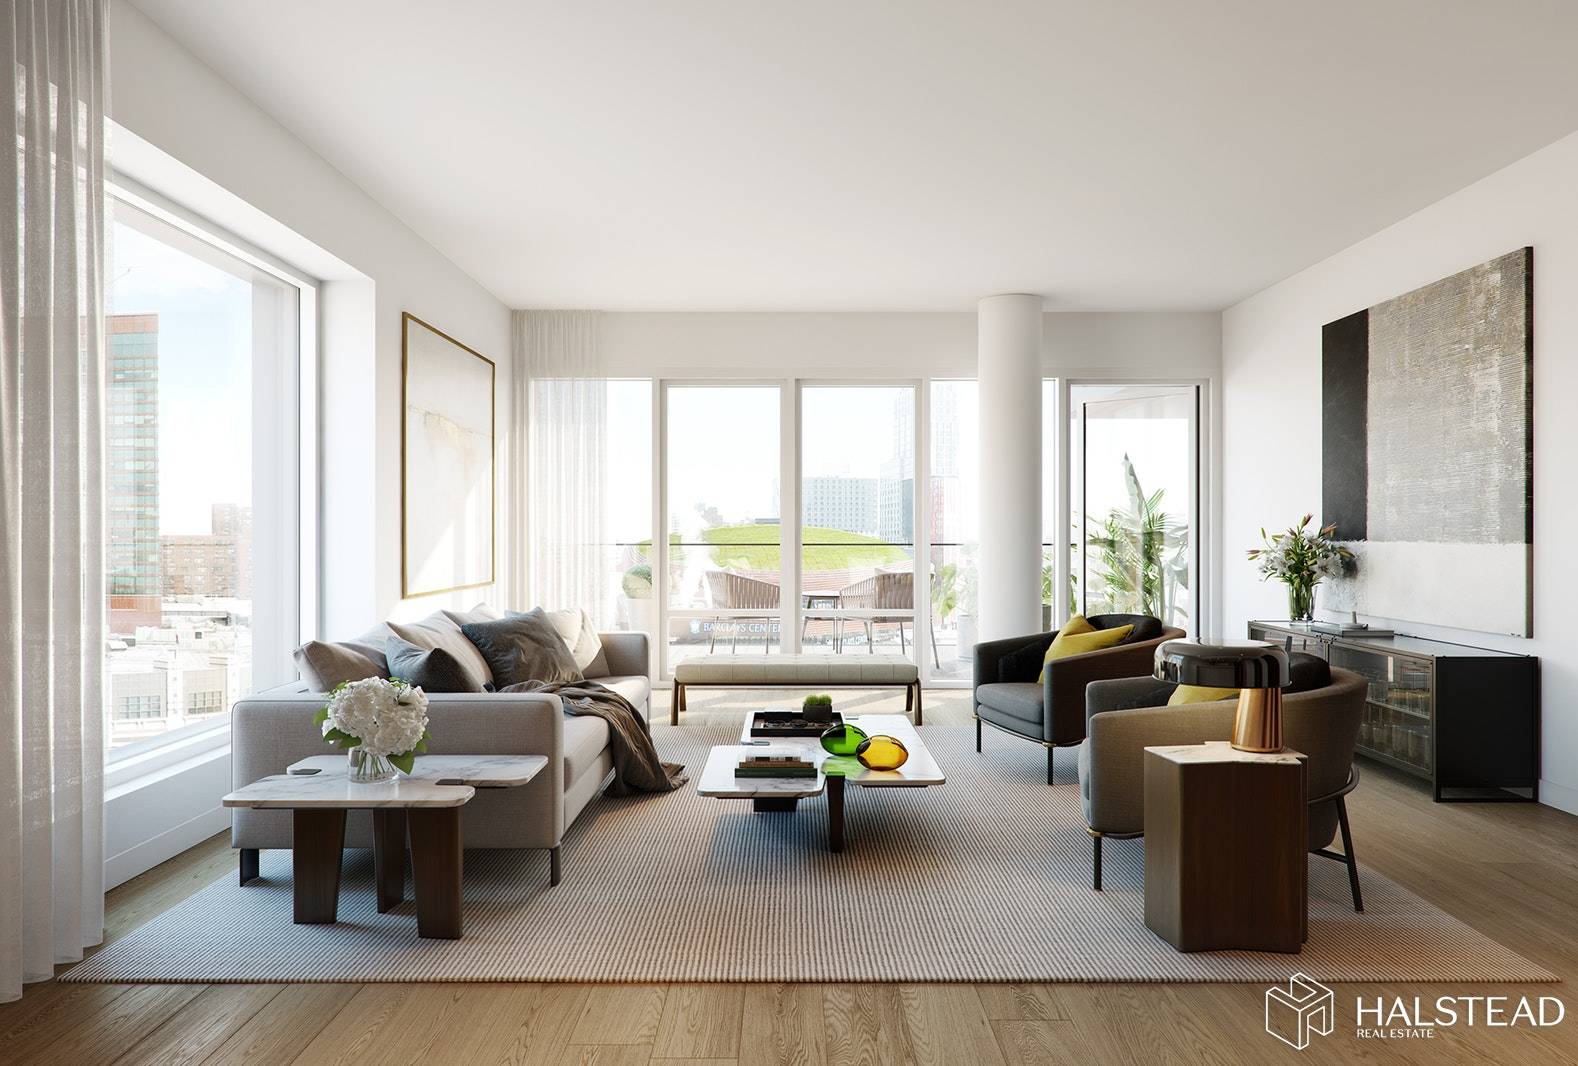 Wrapping the entire southern side of the building and basking in brilliant light, Residence 703 is an exquisitely designed, gracious 3 bedroom, 2.